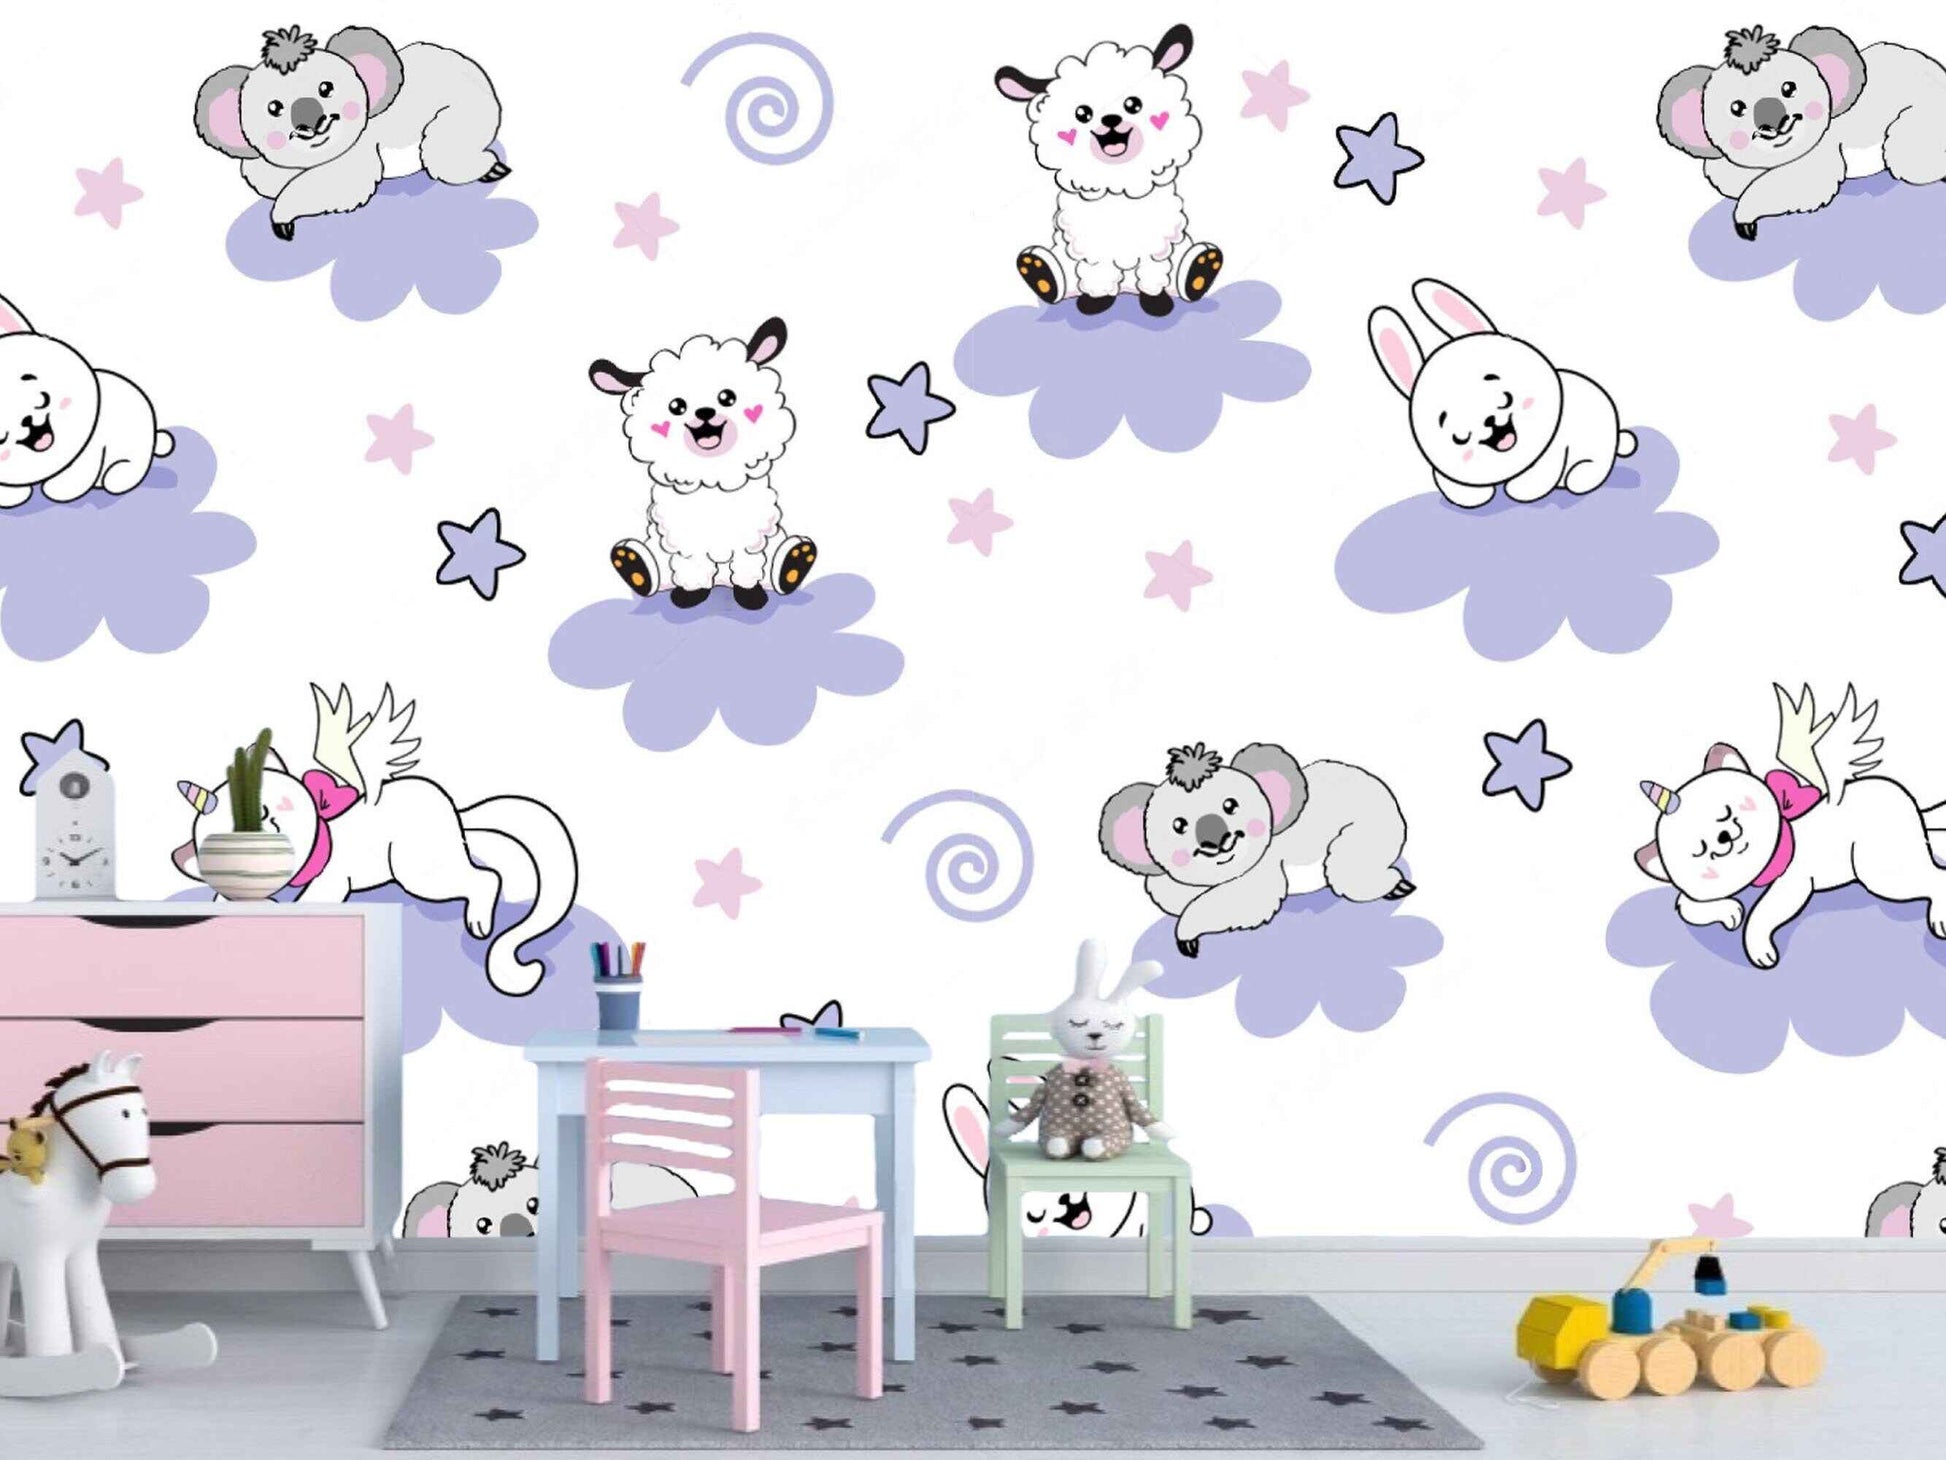 Adorable animal wall decor in a baby's room, featuring lovable cartoon characters that spark joy and imagination.